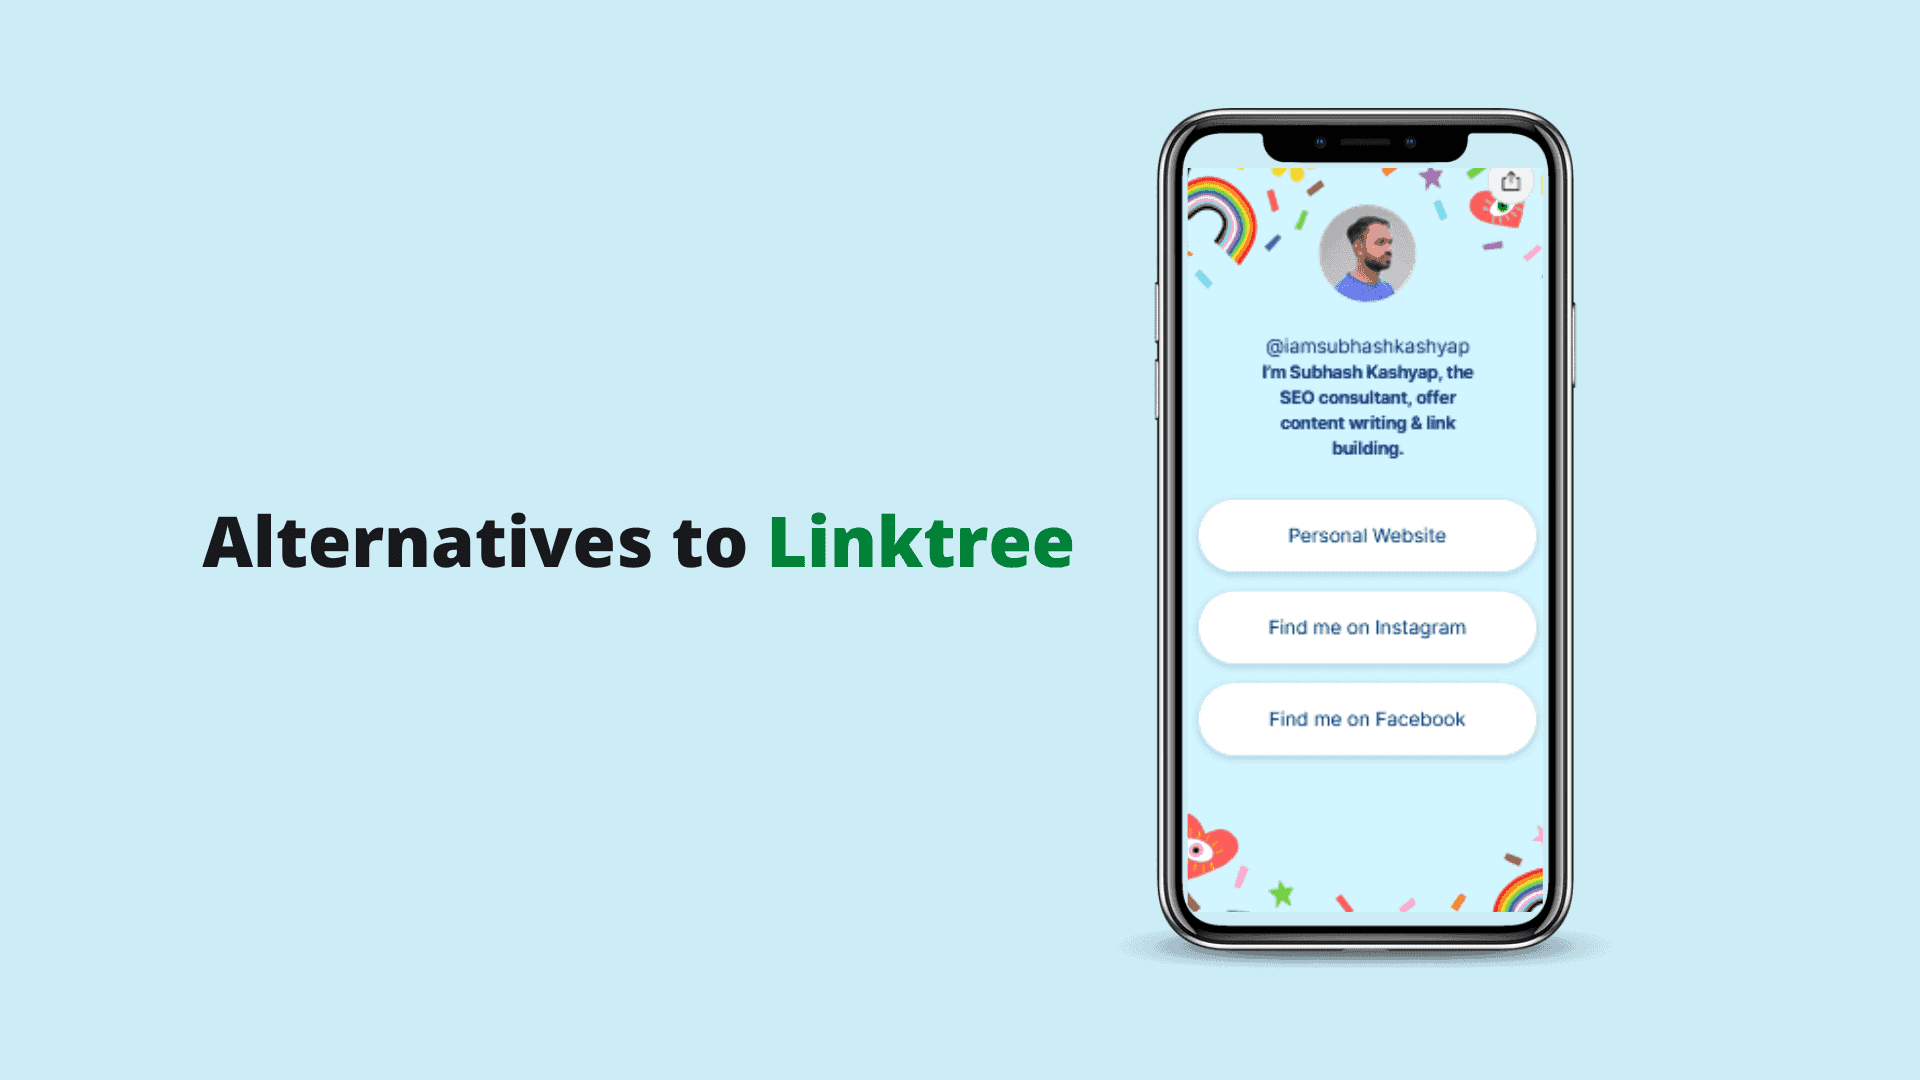 Explore Linktree alternatives for your business